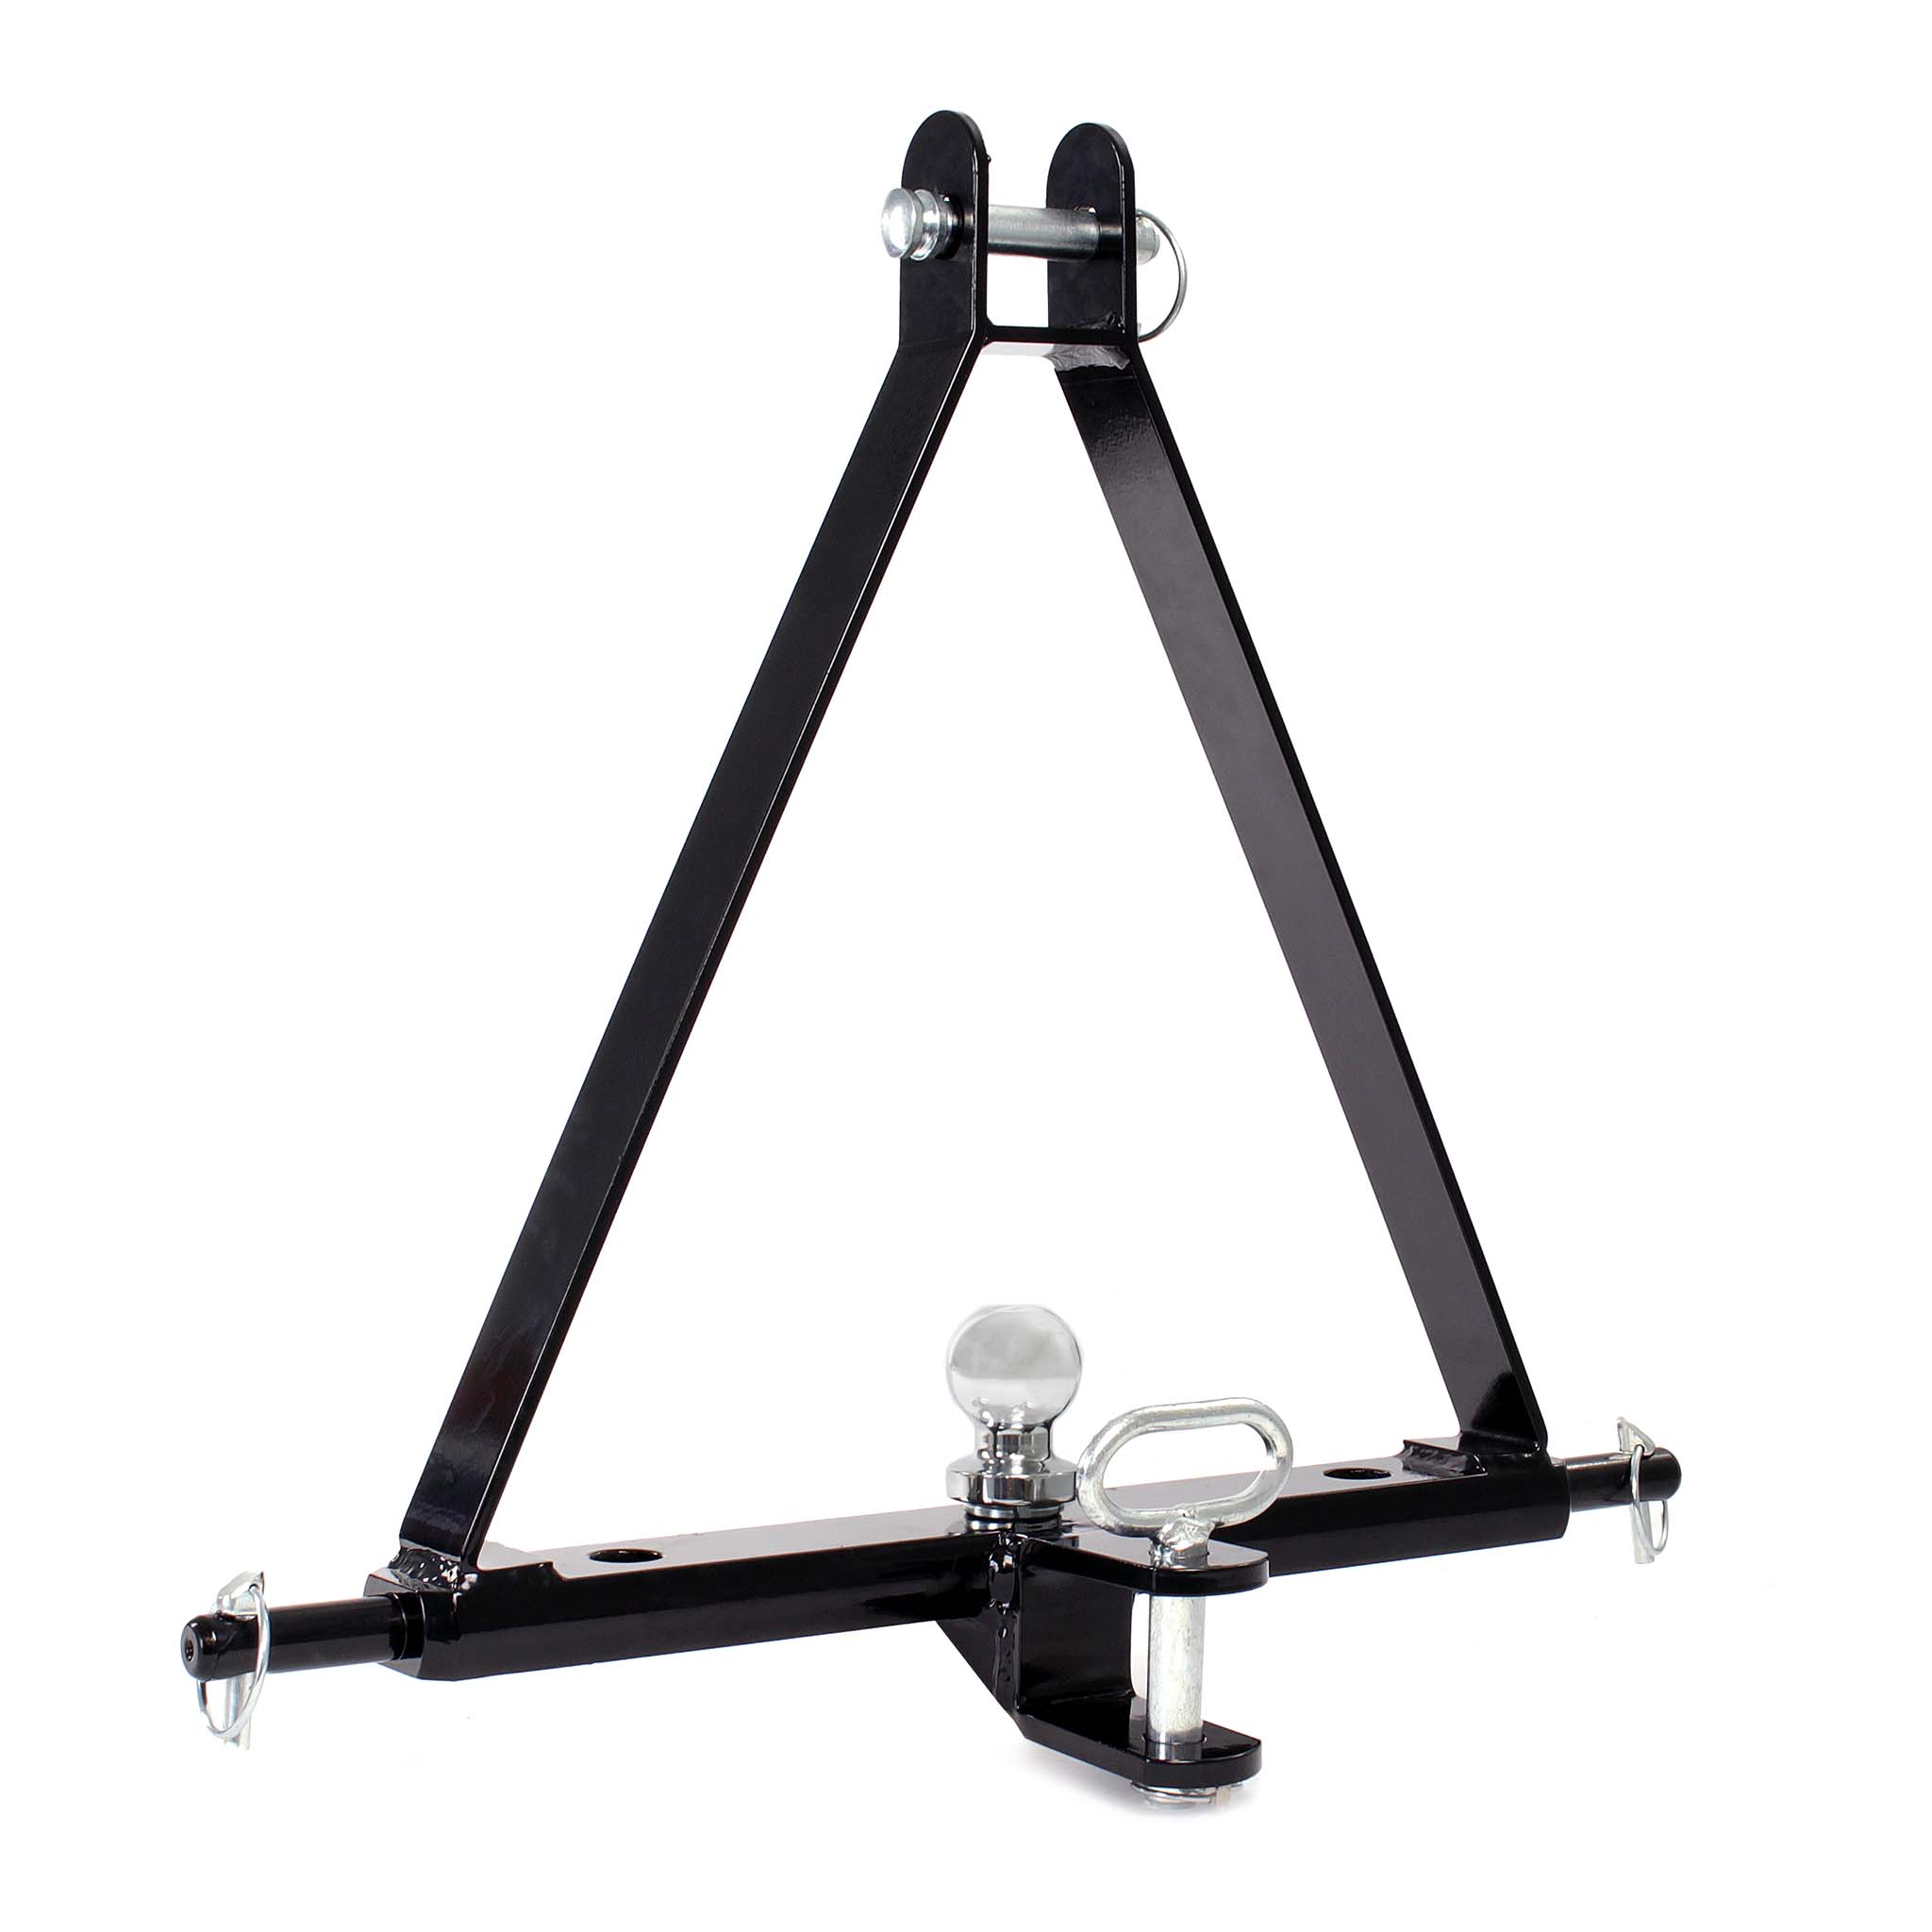 Wiltec Triangle d'attelage 610 mm Barre Remorquage Agricole Rail  triangulaire Cat. 1 Anti-rotation